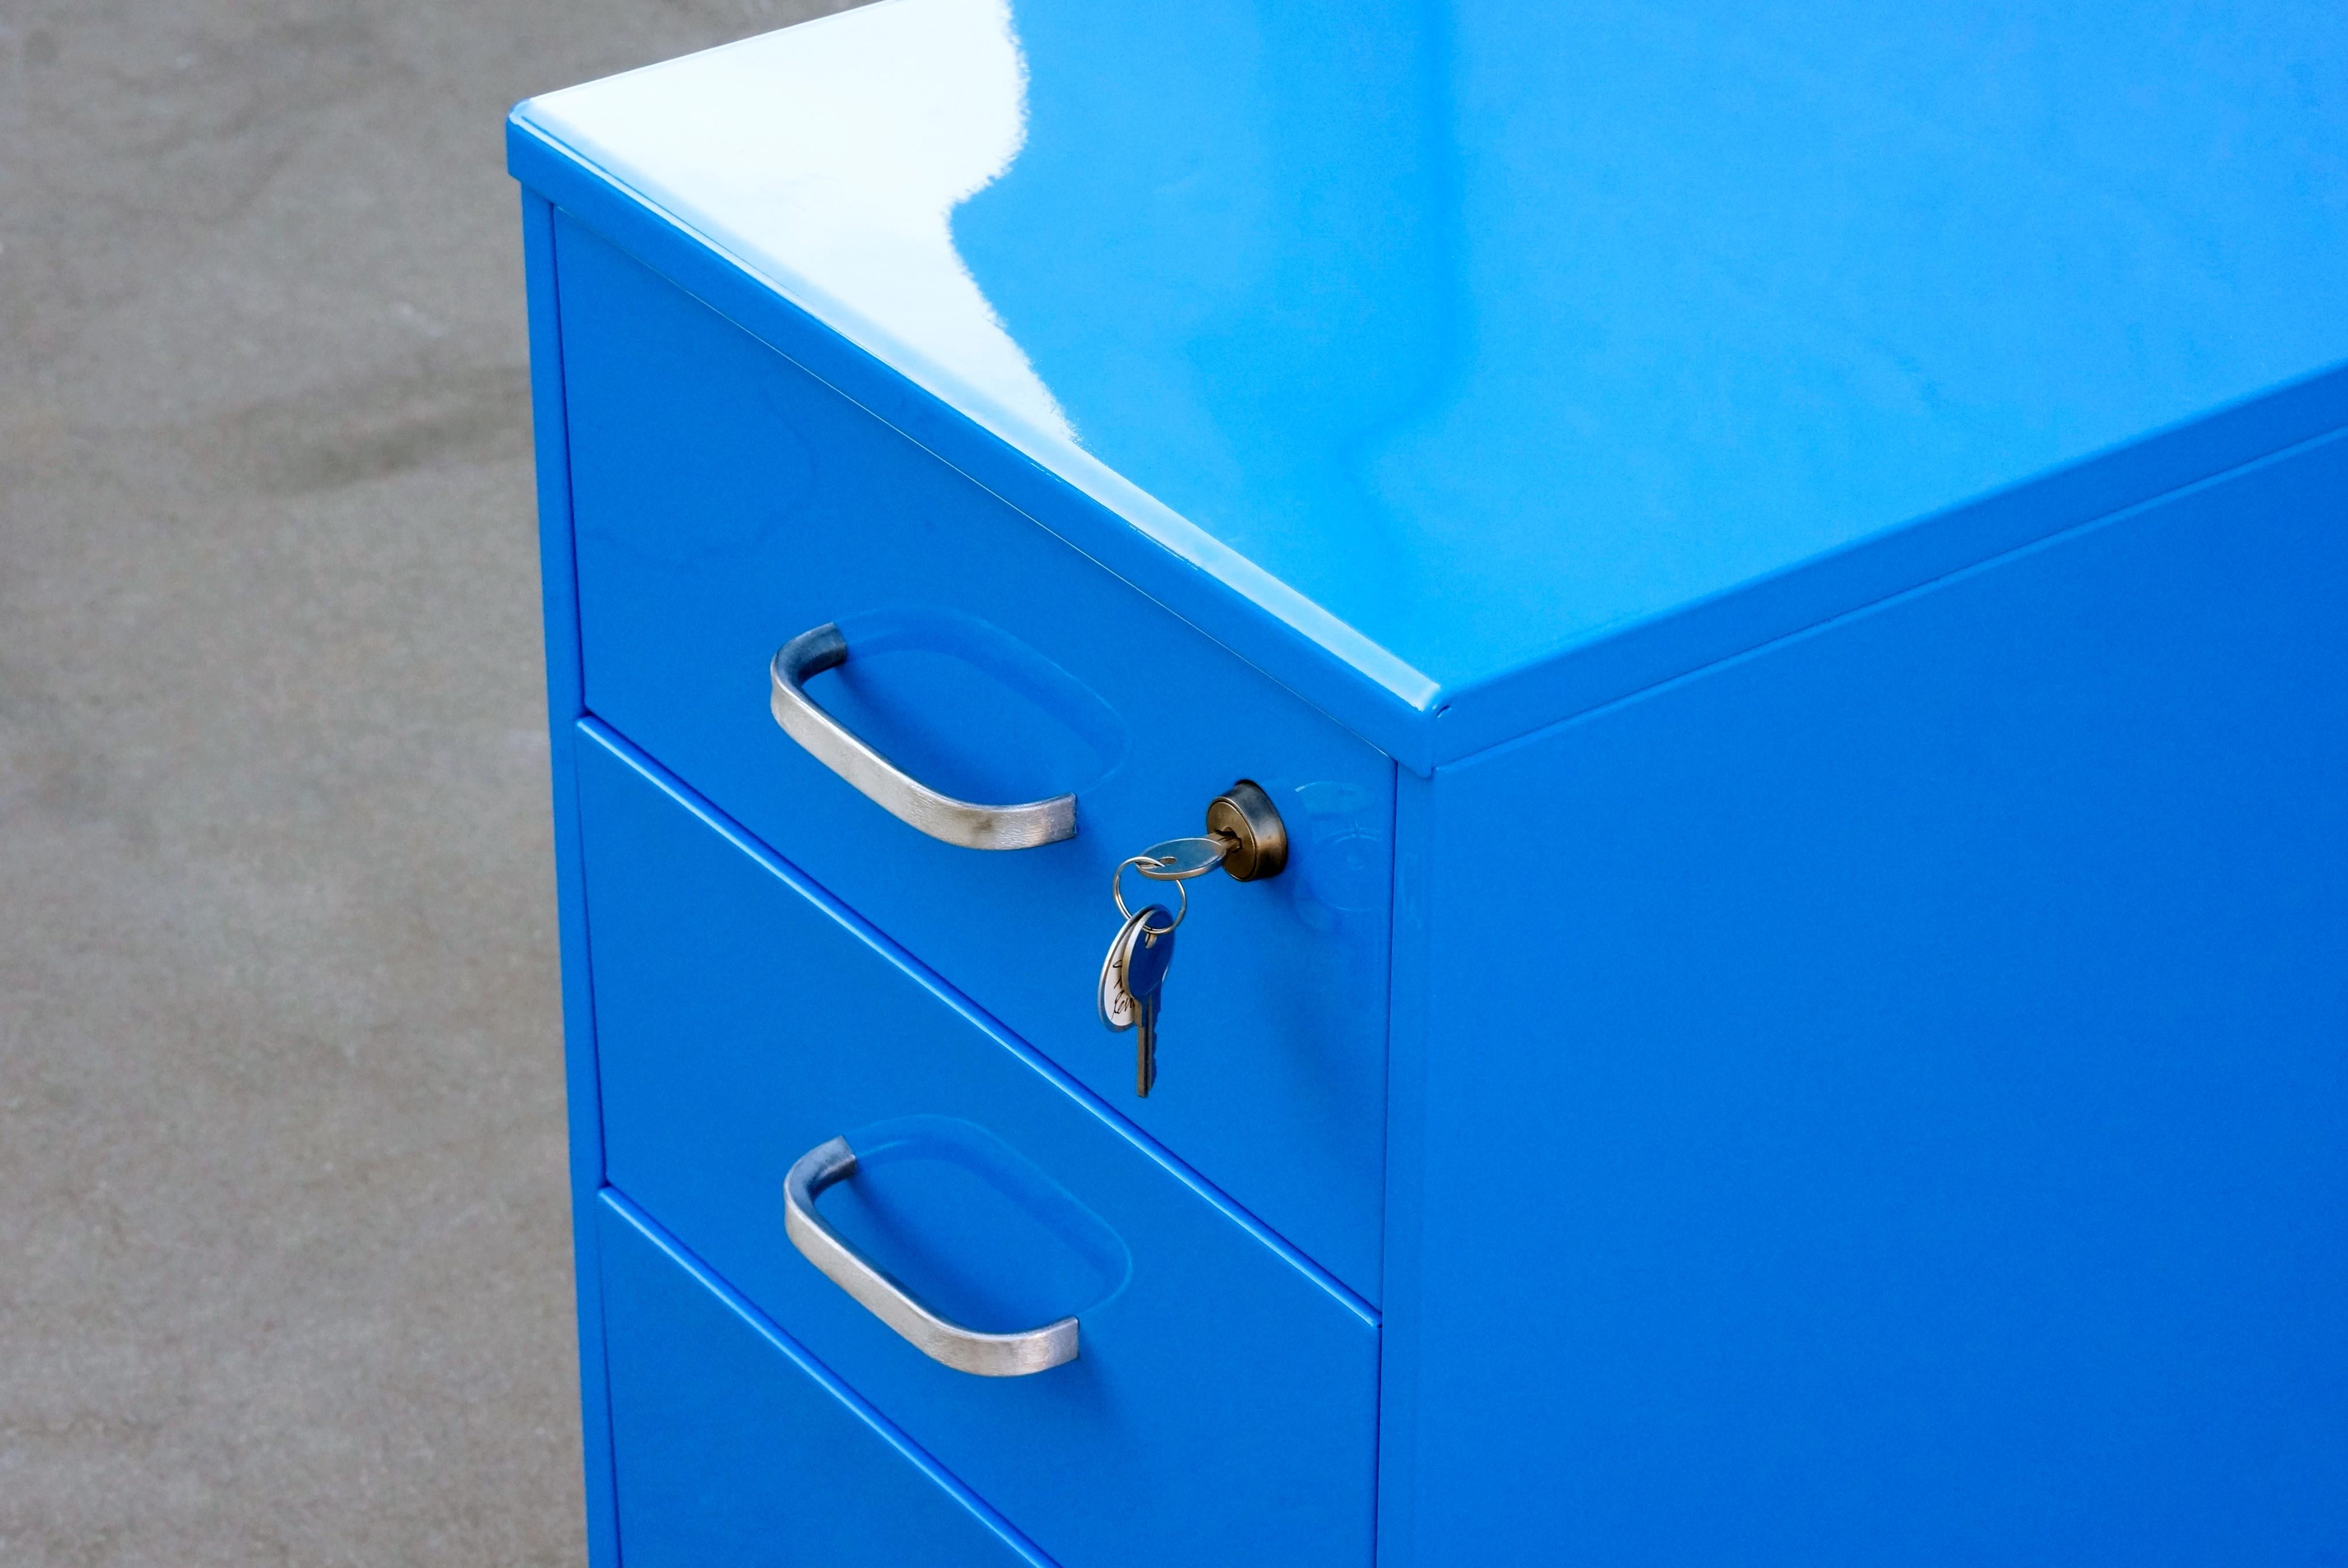 Vintage 1970s Steelcase file cabinet powder coated in gloss 